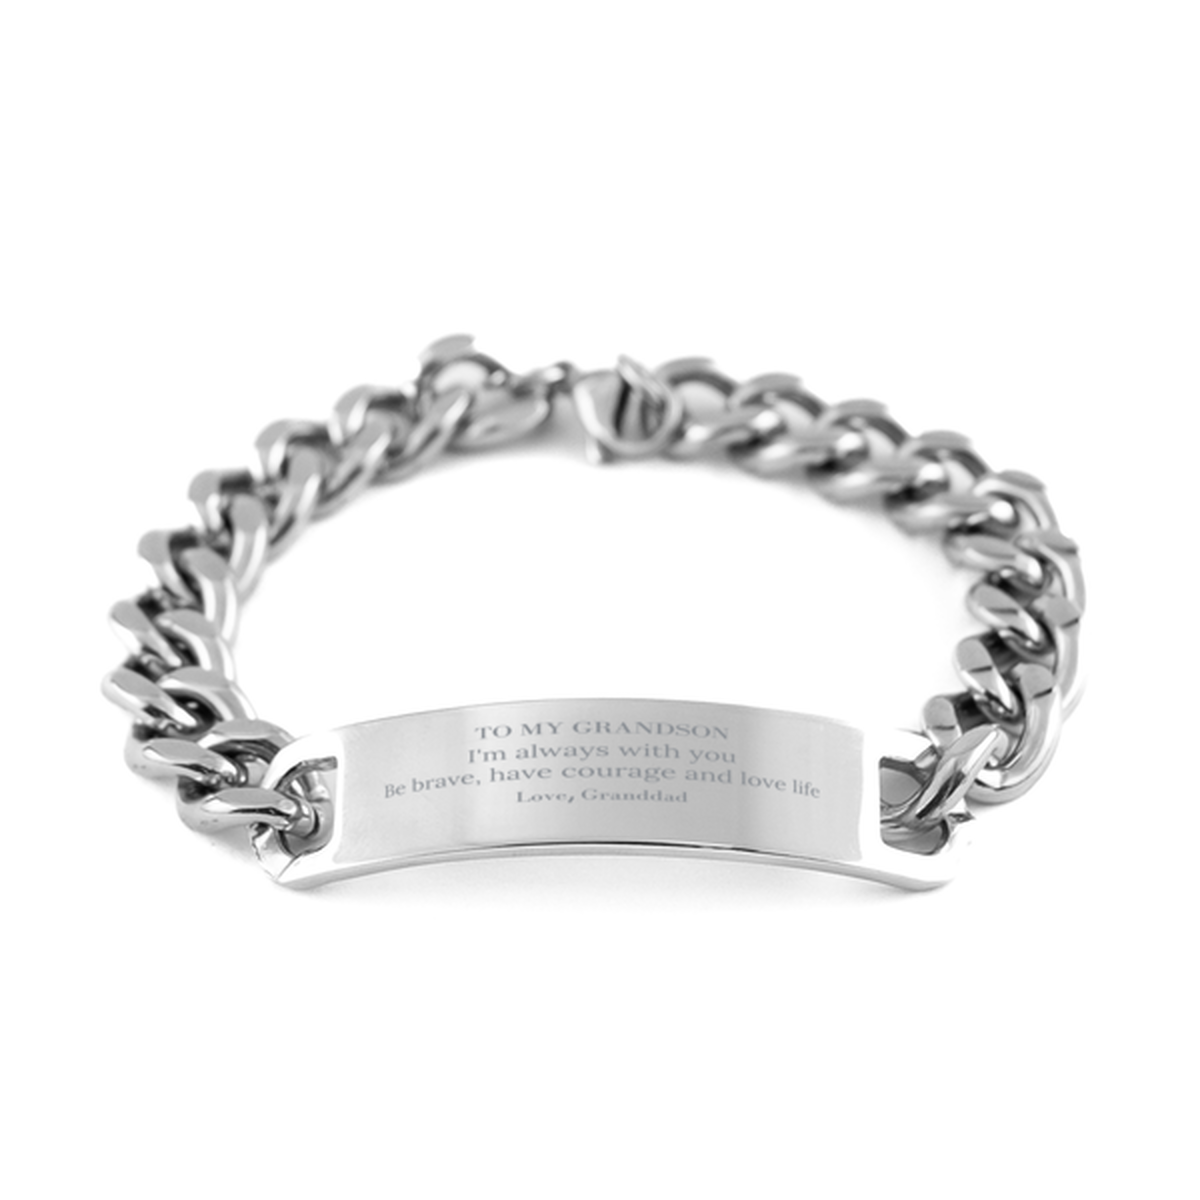 To My Grandson Gifts from Granddad, Unique Cuban Chain Stainless Steel Bracelet Inspirational Christmas Birthday Graduation Gifts for Grandson I'm always with you. Be brave, have courage and love life. Love, Granddad